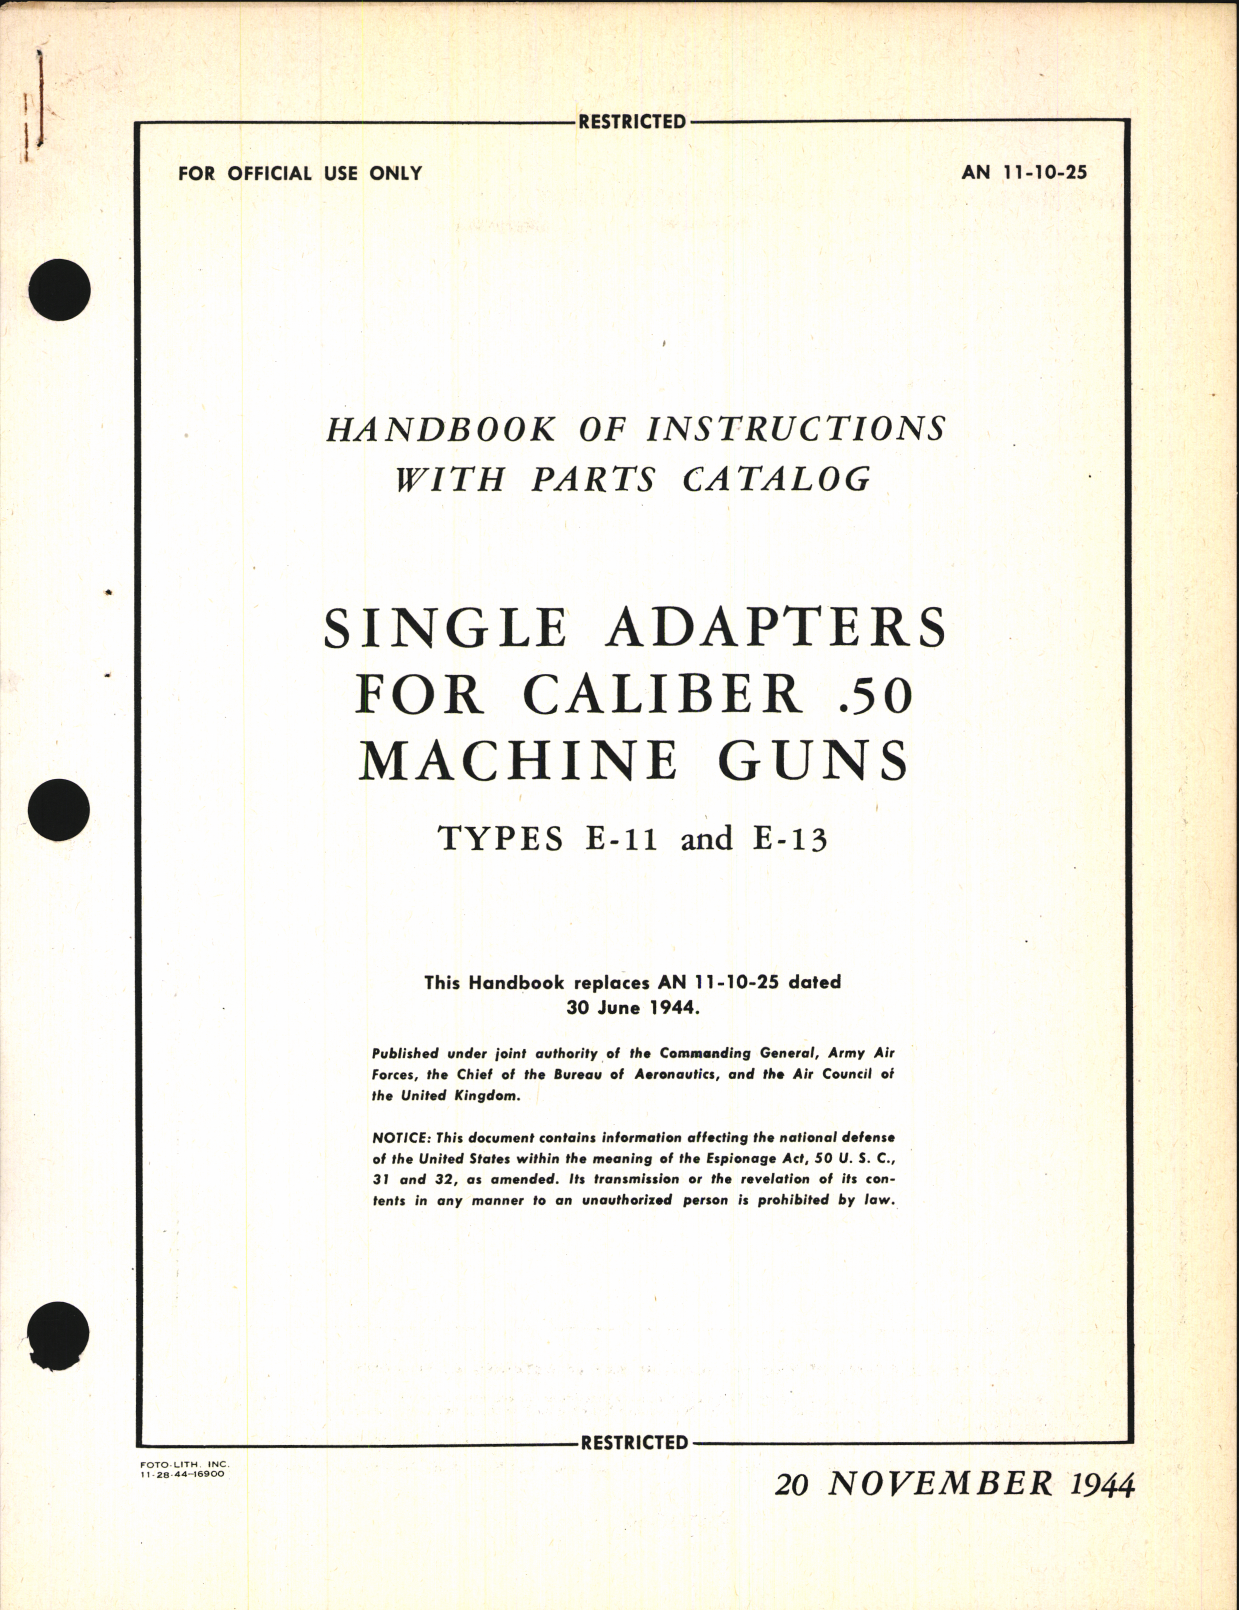 Sample page 1 from AirCorps Library document: Handbook of Instructions with Parts Catalog for Single Adapters for Caliber .50 Machine Guns